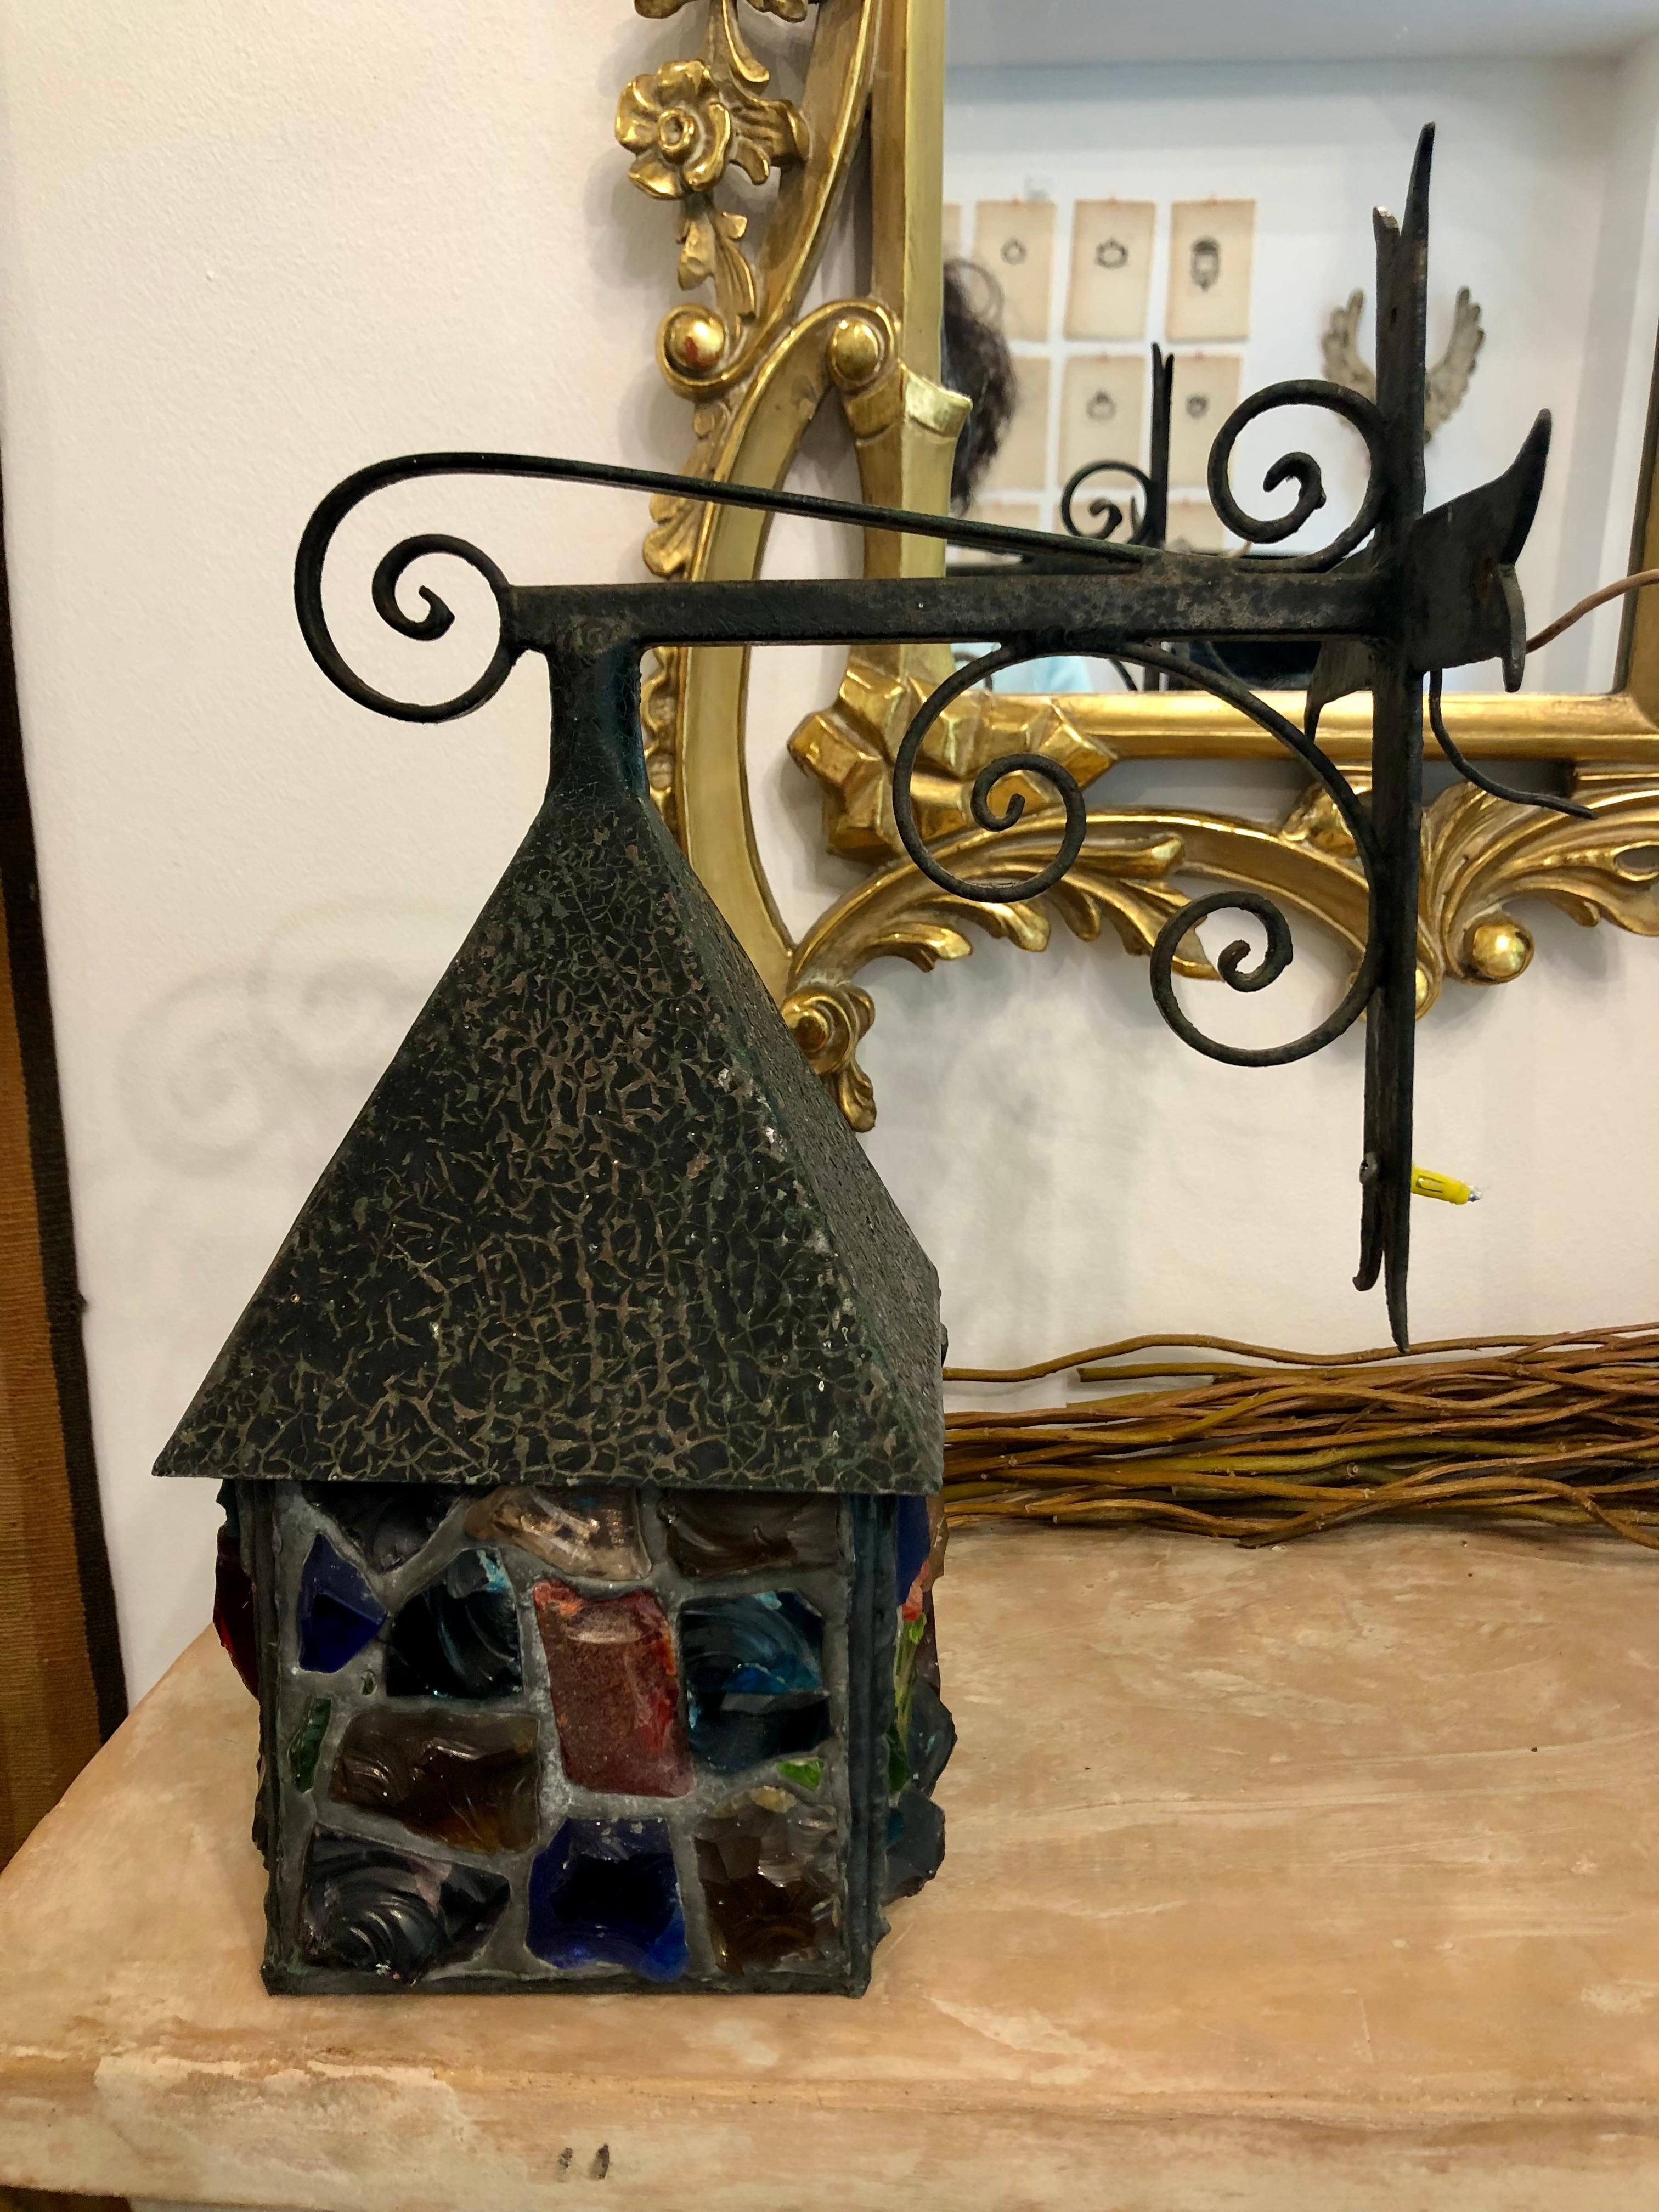 A wonderful Arts & Crafts style, mid-century lantern by English glass artist Peter Marsh. Leaded multicoloured glass  accented by Arts & Crafts style wrought iron scrollwork mounts.
Peter Marsh is known for his chunky, house shaped lamps, with jewel